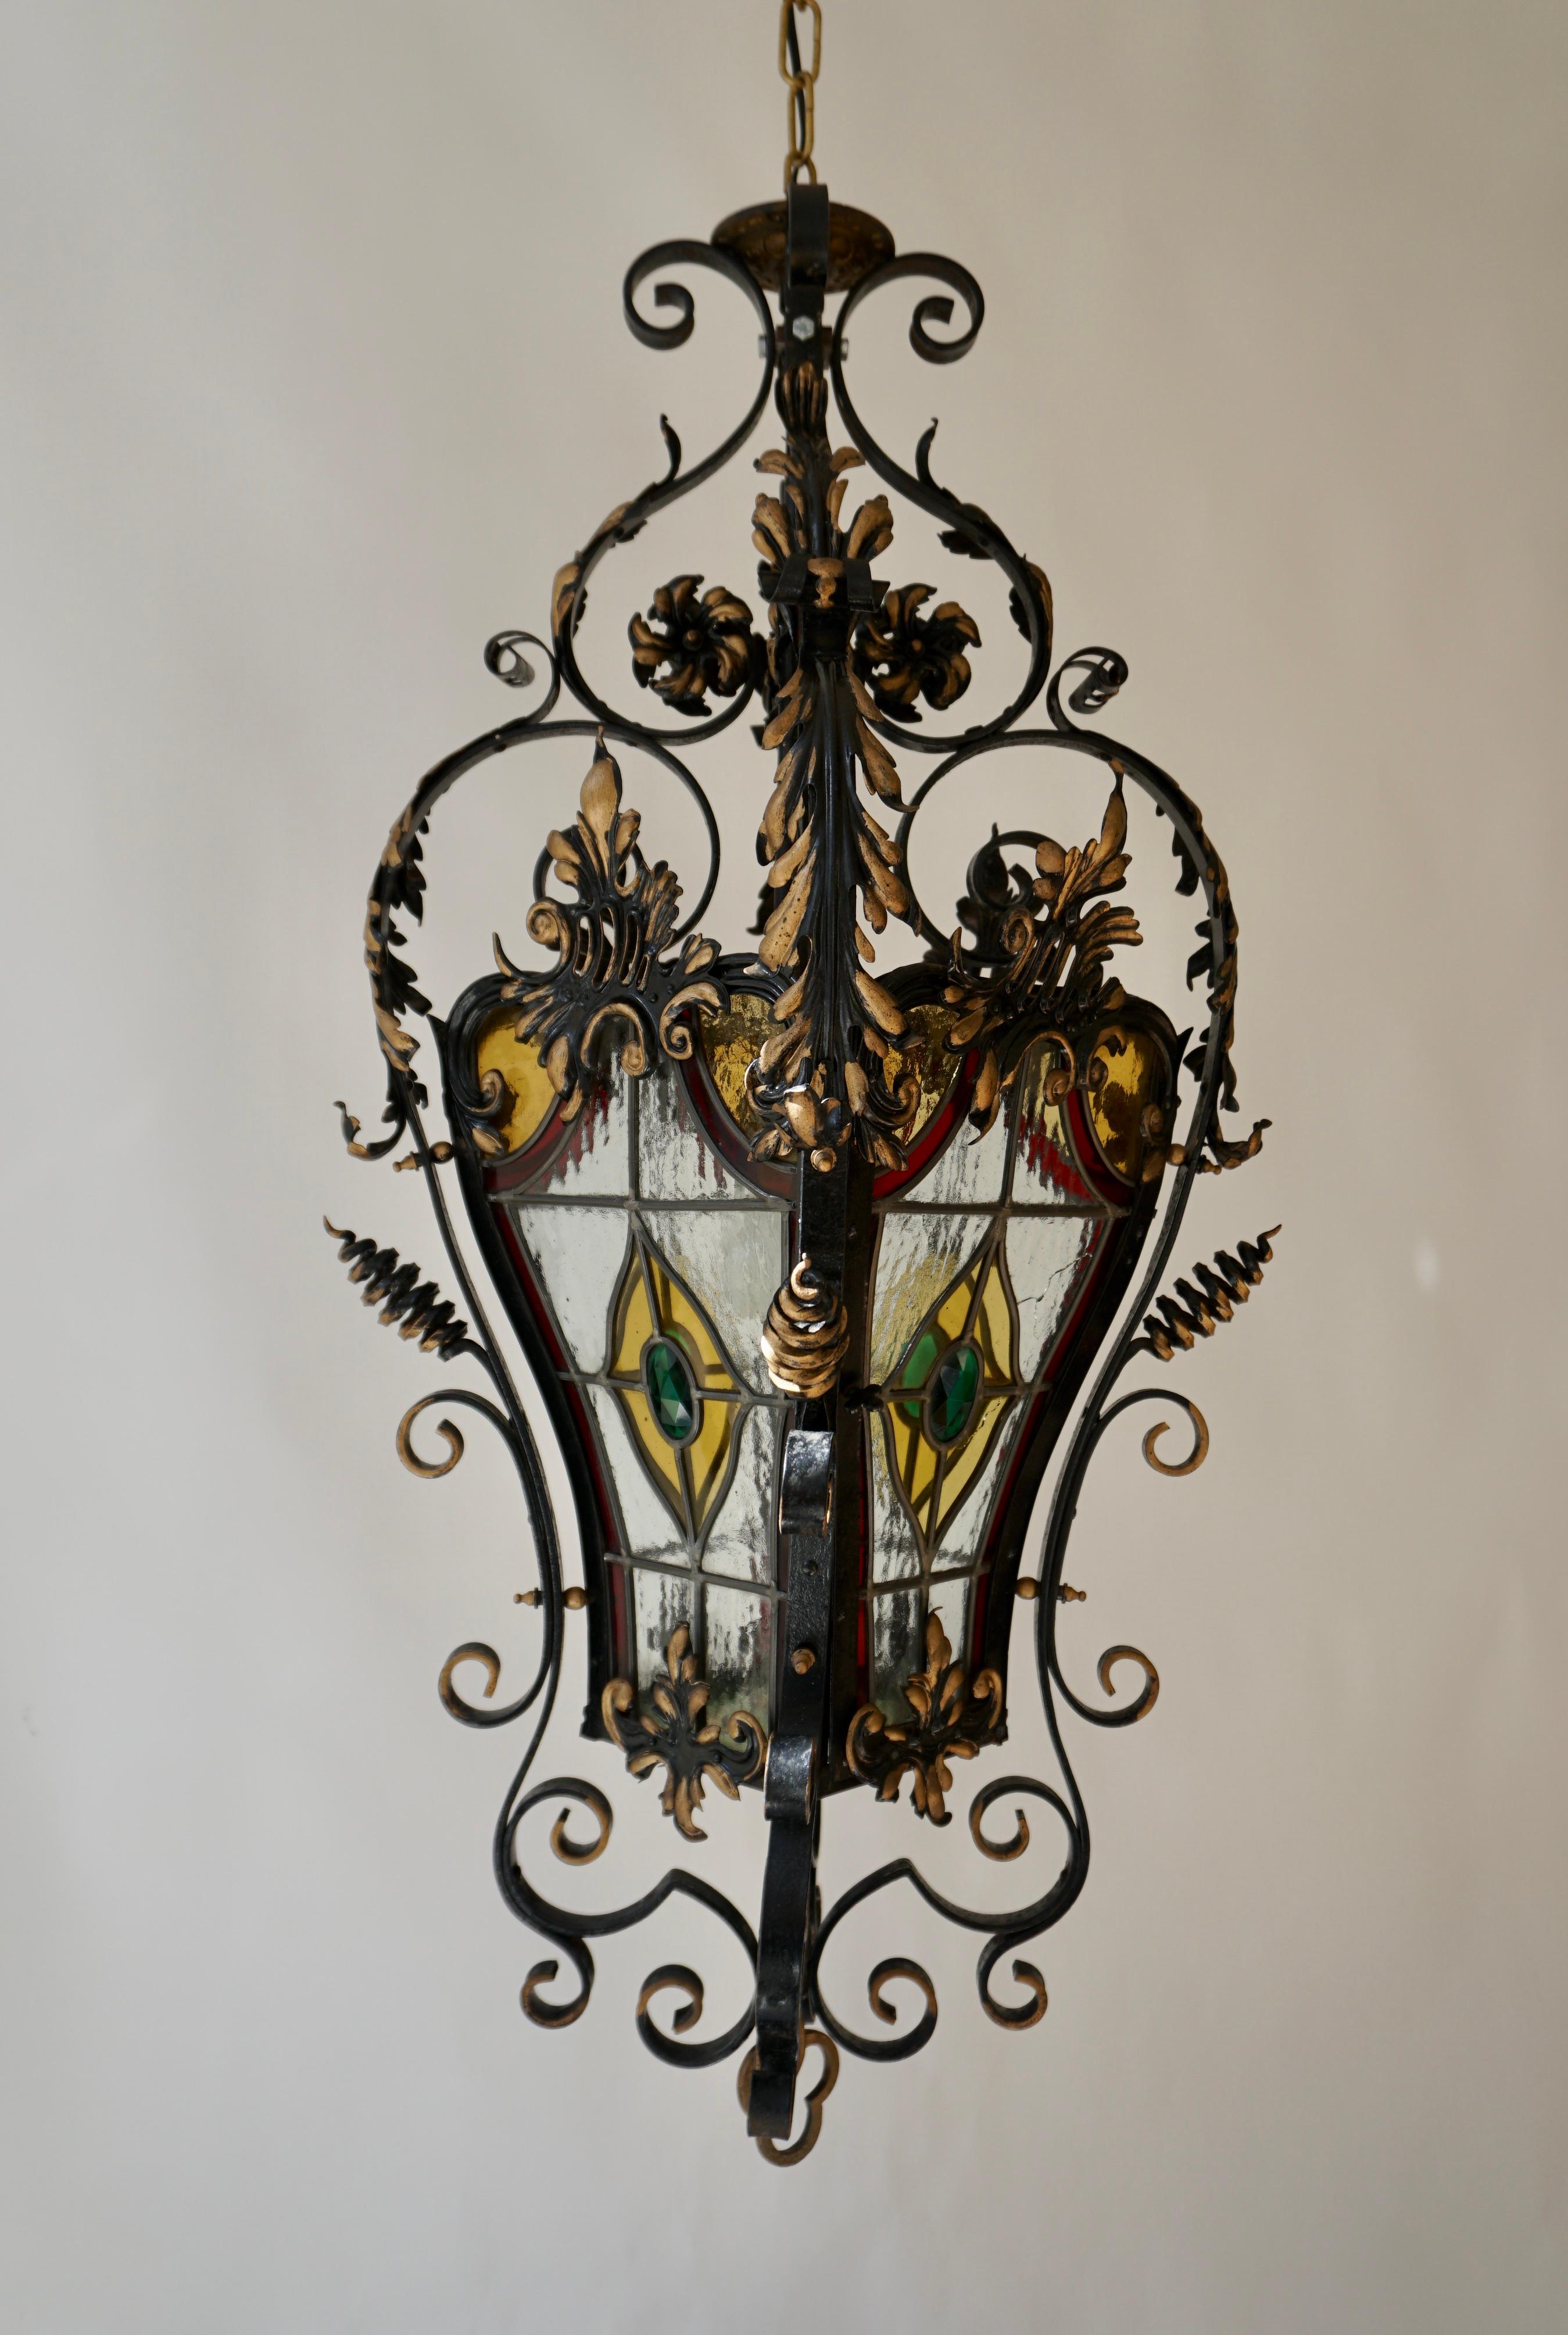 Elegant Italian scrolled foliage wrought iron and stained glass hanging hall lantern with one light interior. Originally candle powered and has been electrified.
Antique lantern with colored stained glass - leaded glass .A wrought iron French candle